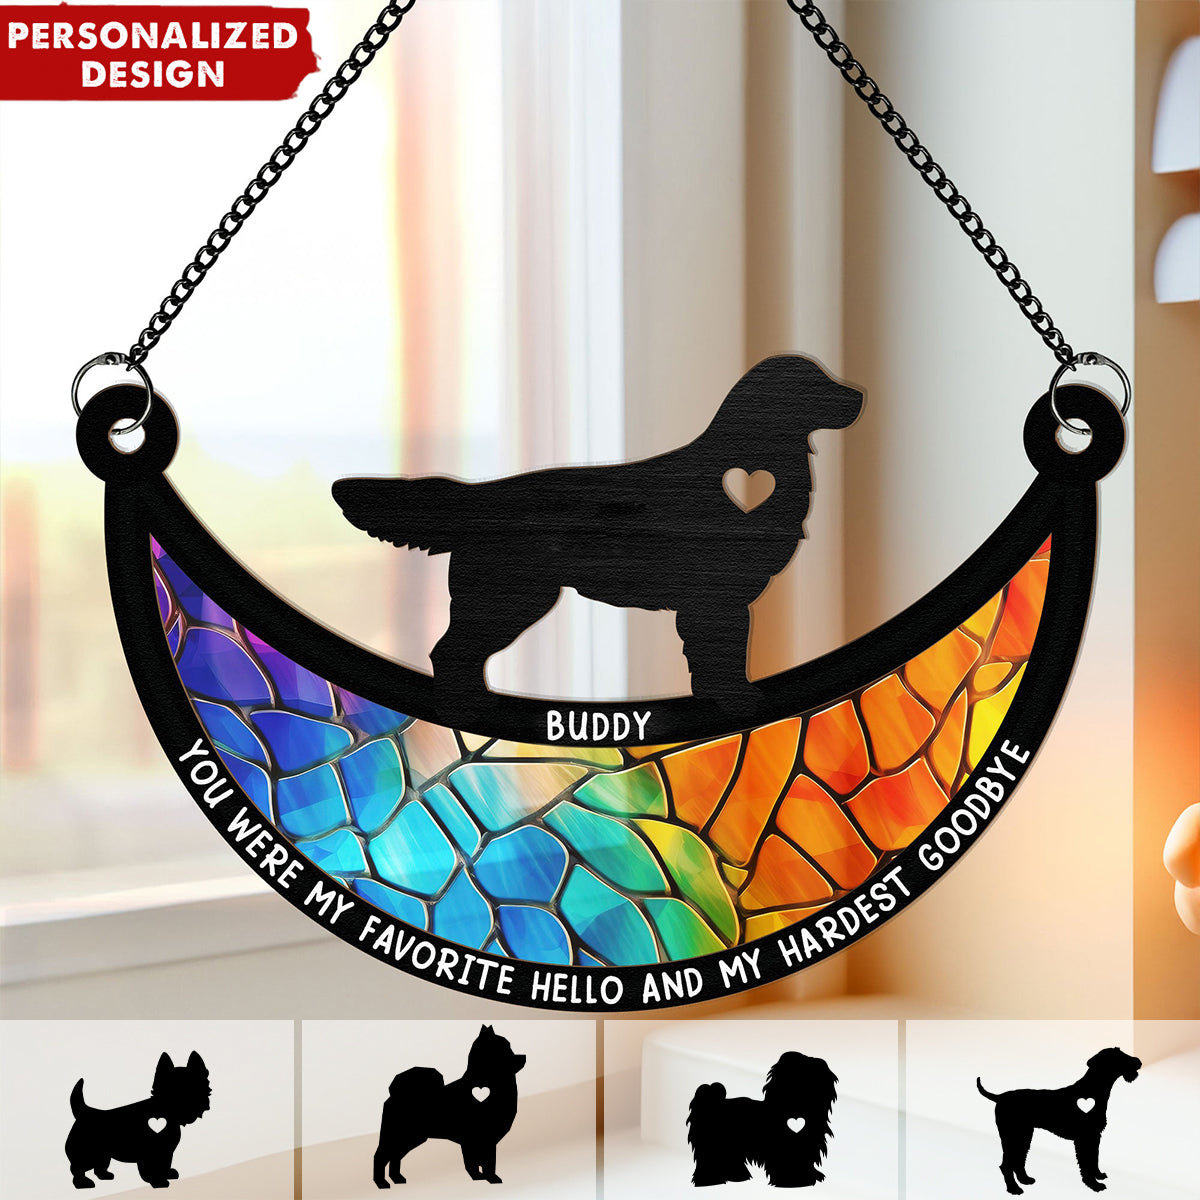 Dogs On The Moon - Personalized Window Hanging Suncatcher Ornament